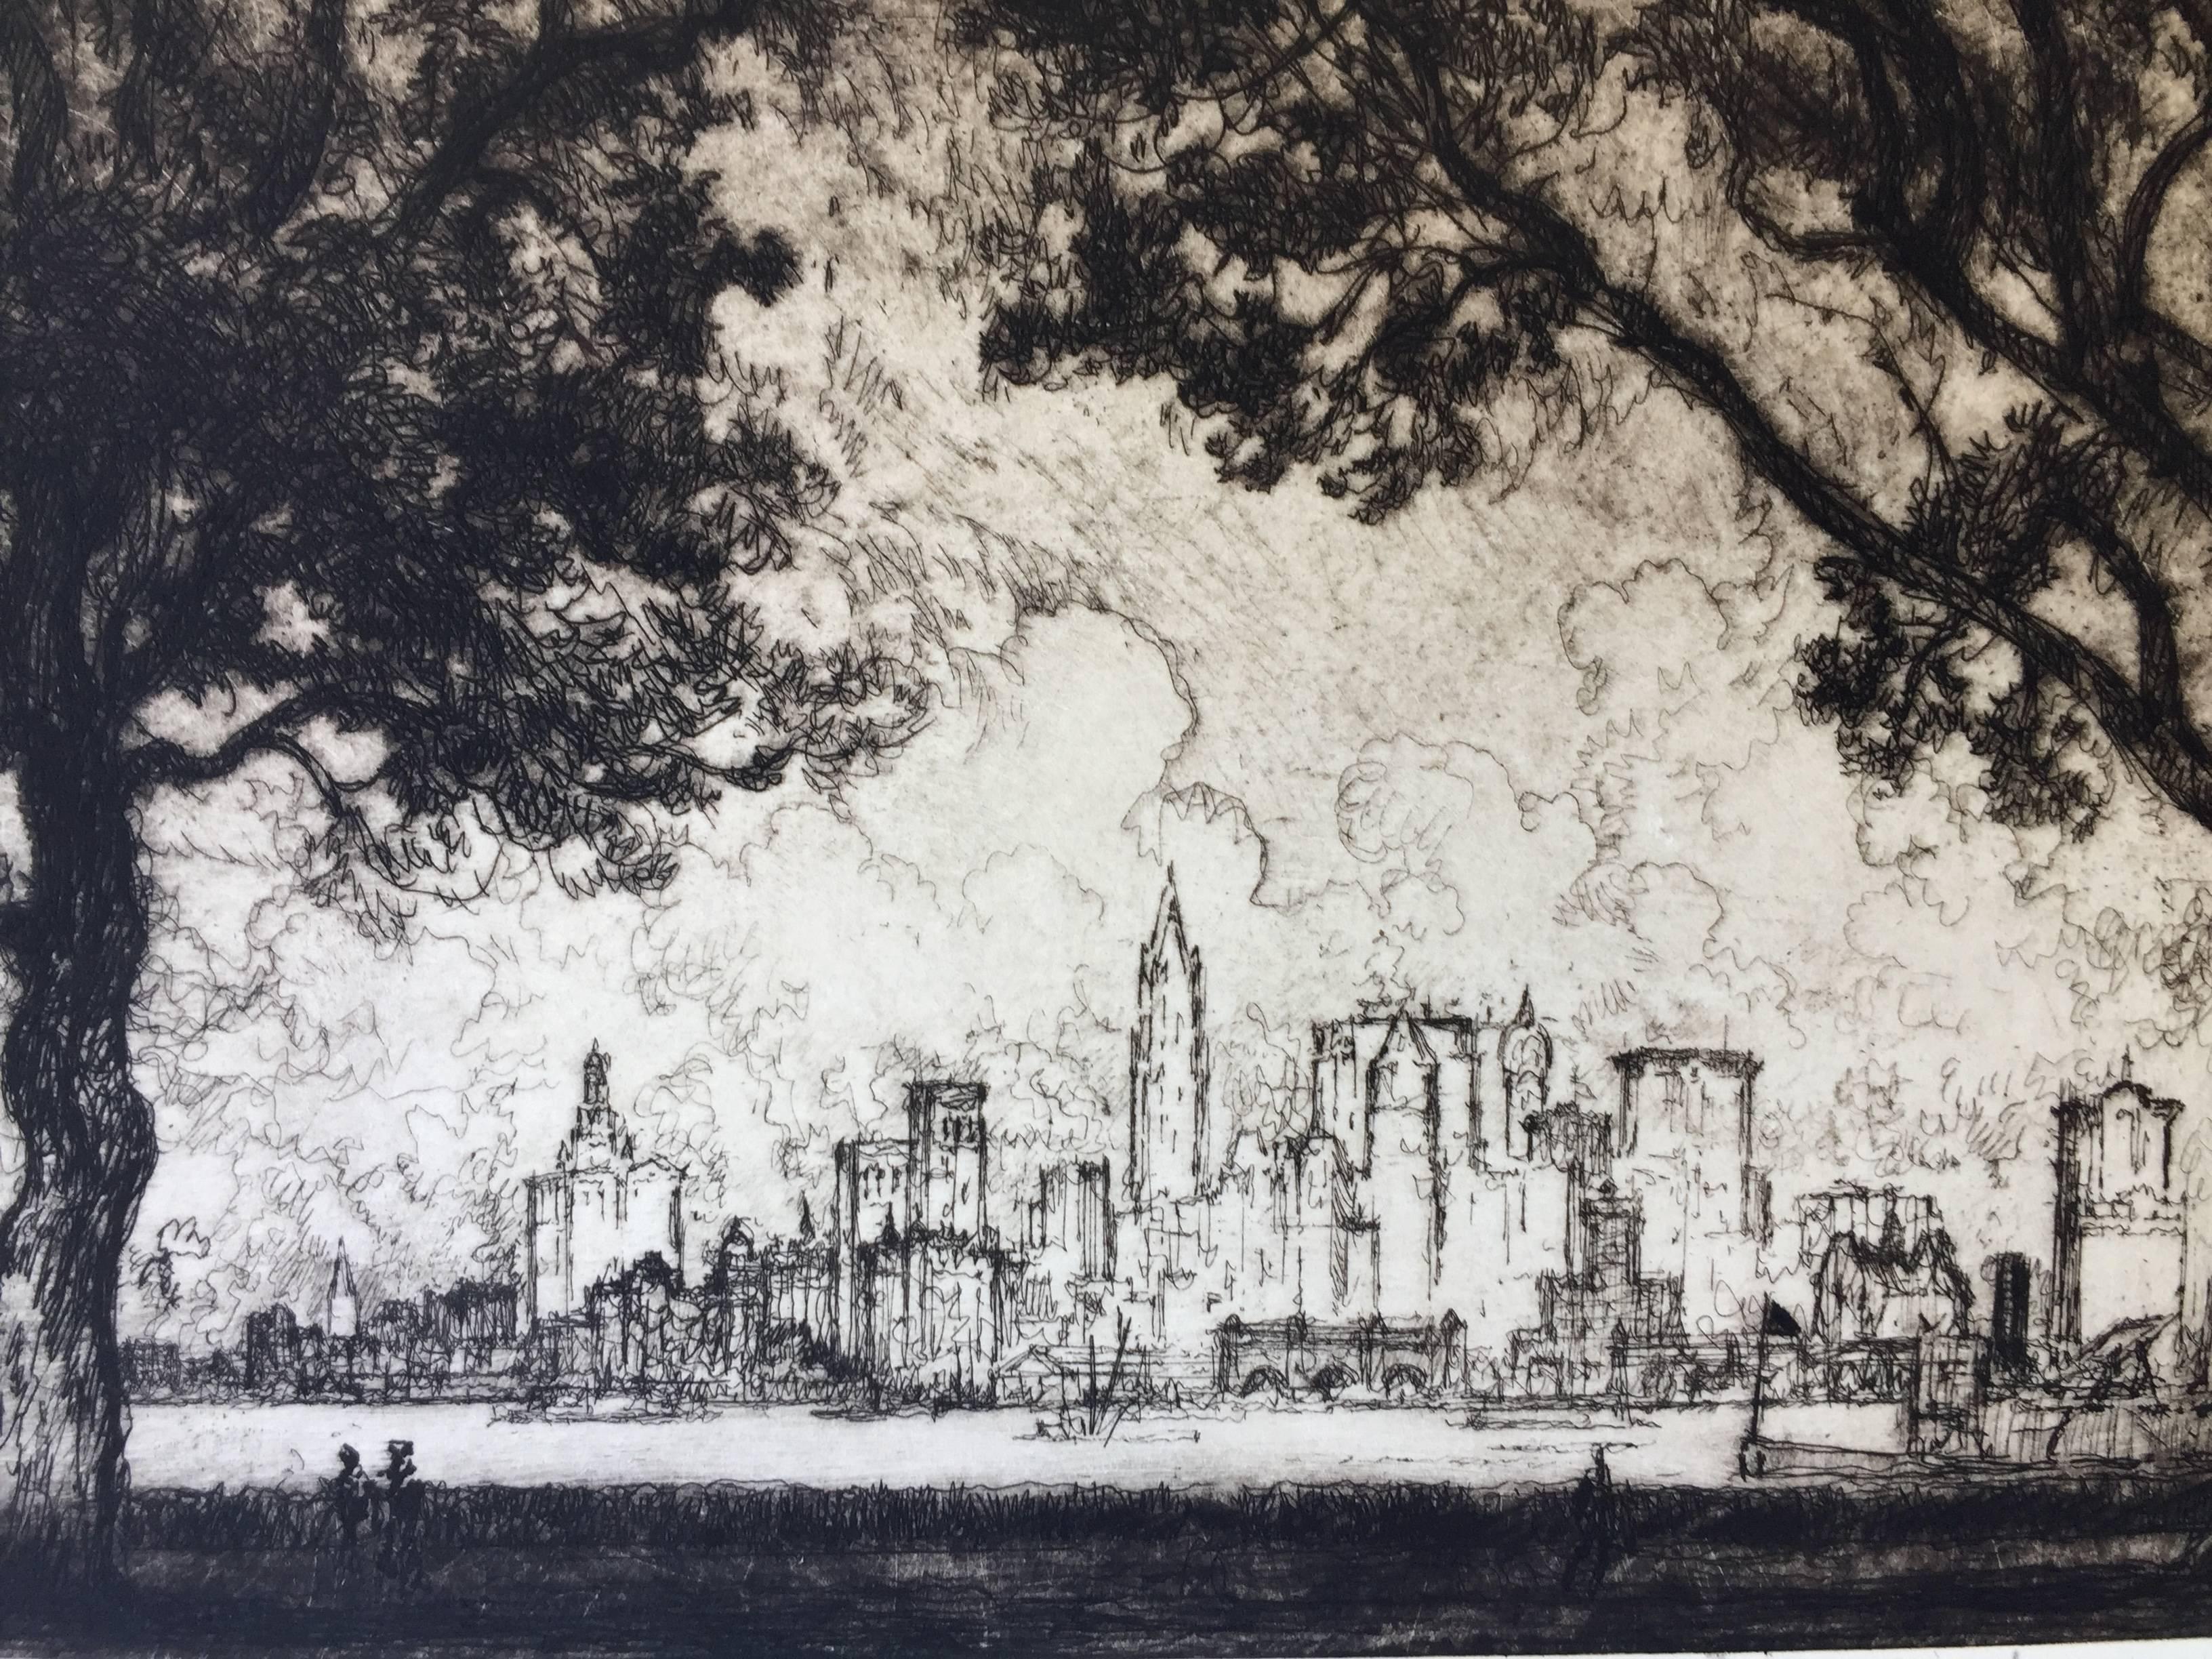 JOSEPH PENNELL

NEW YORK FROM GOVERNOR'S ISLAND, 1915 (Wuerth 668)
Drypoint, signed in pencil. Edition according to Wuerth about 80.
Annotated 